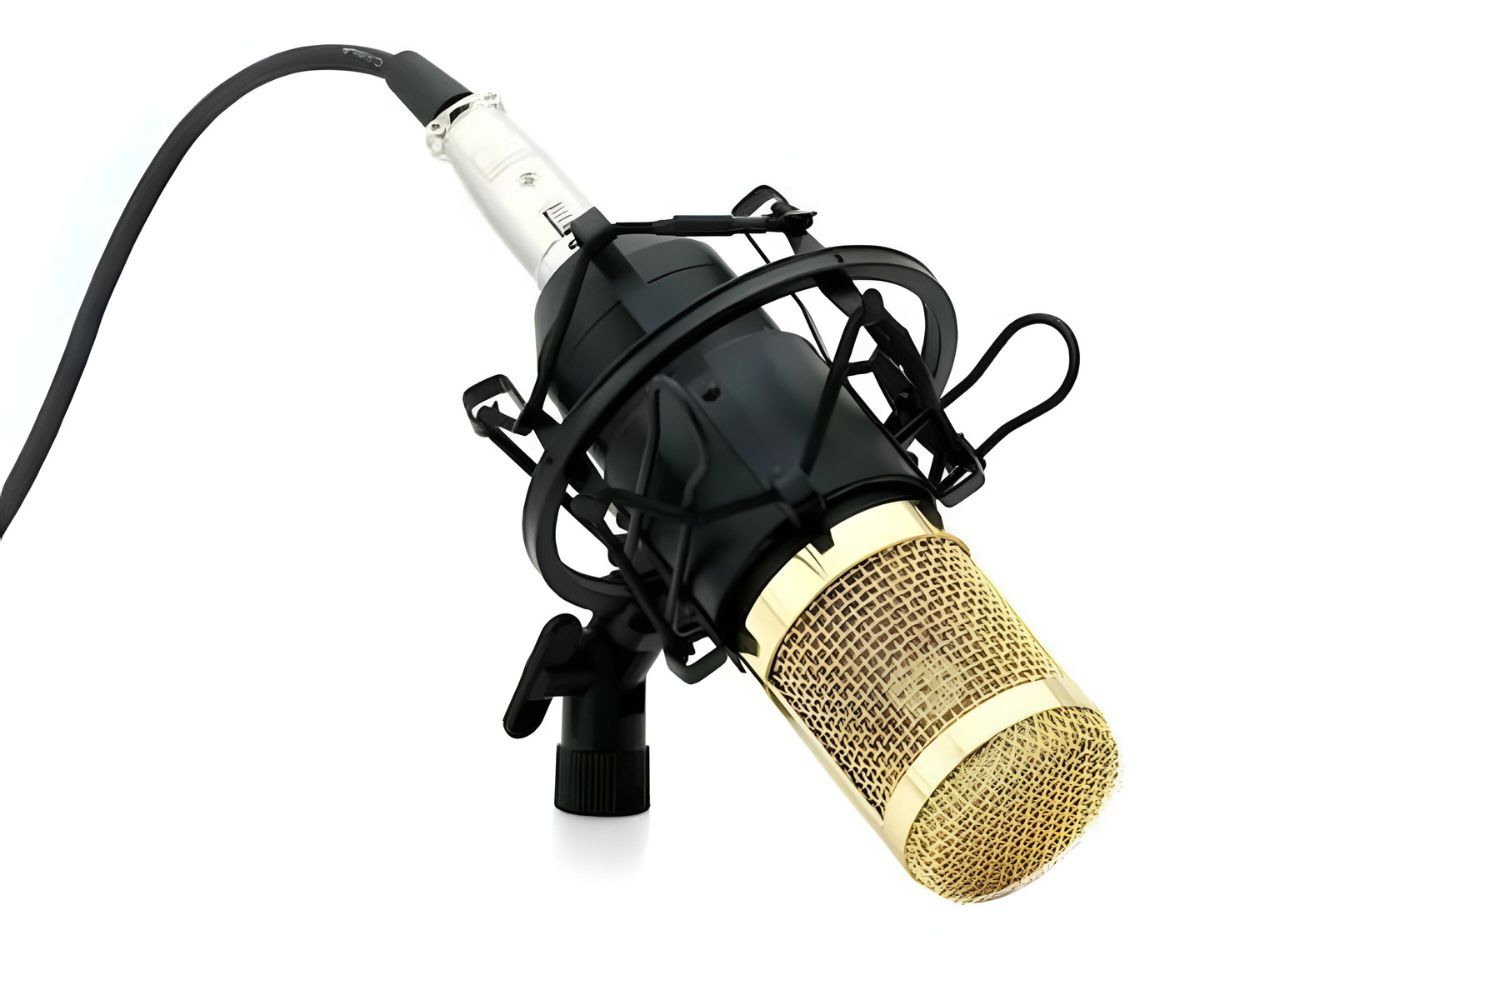 How To Set Up An Ohuhu Studio Condenser Microphone